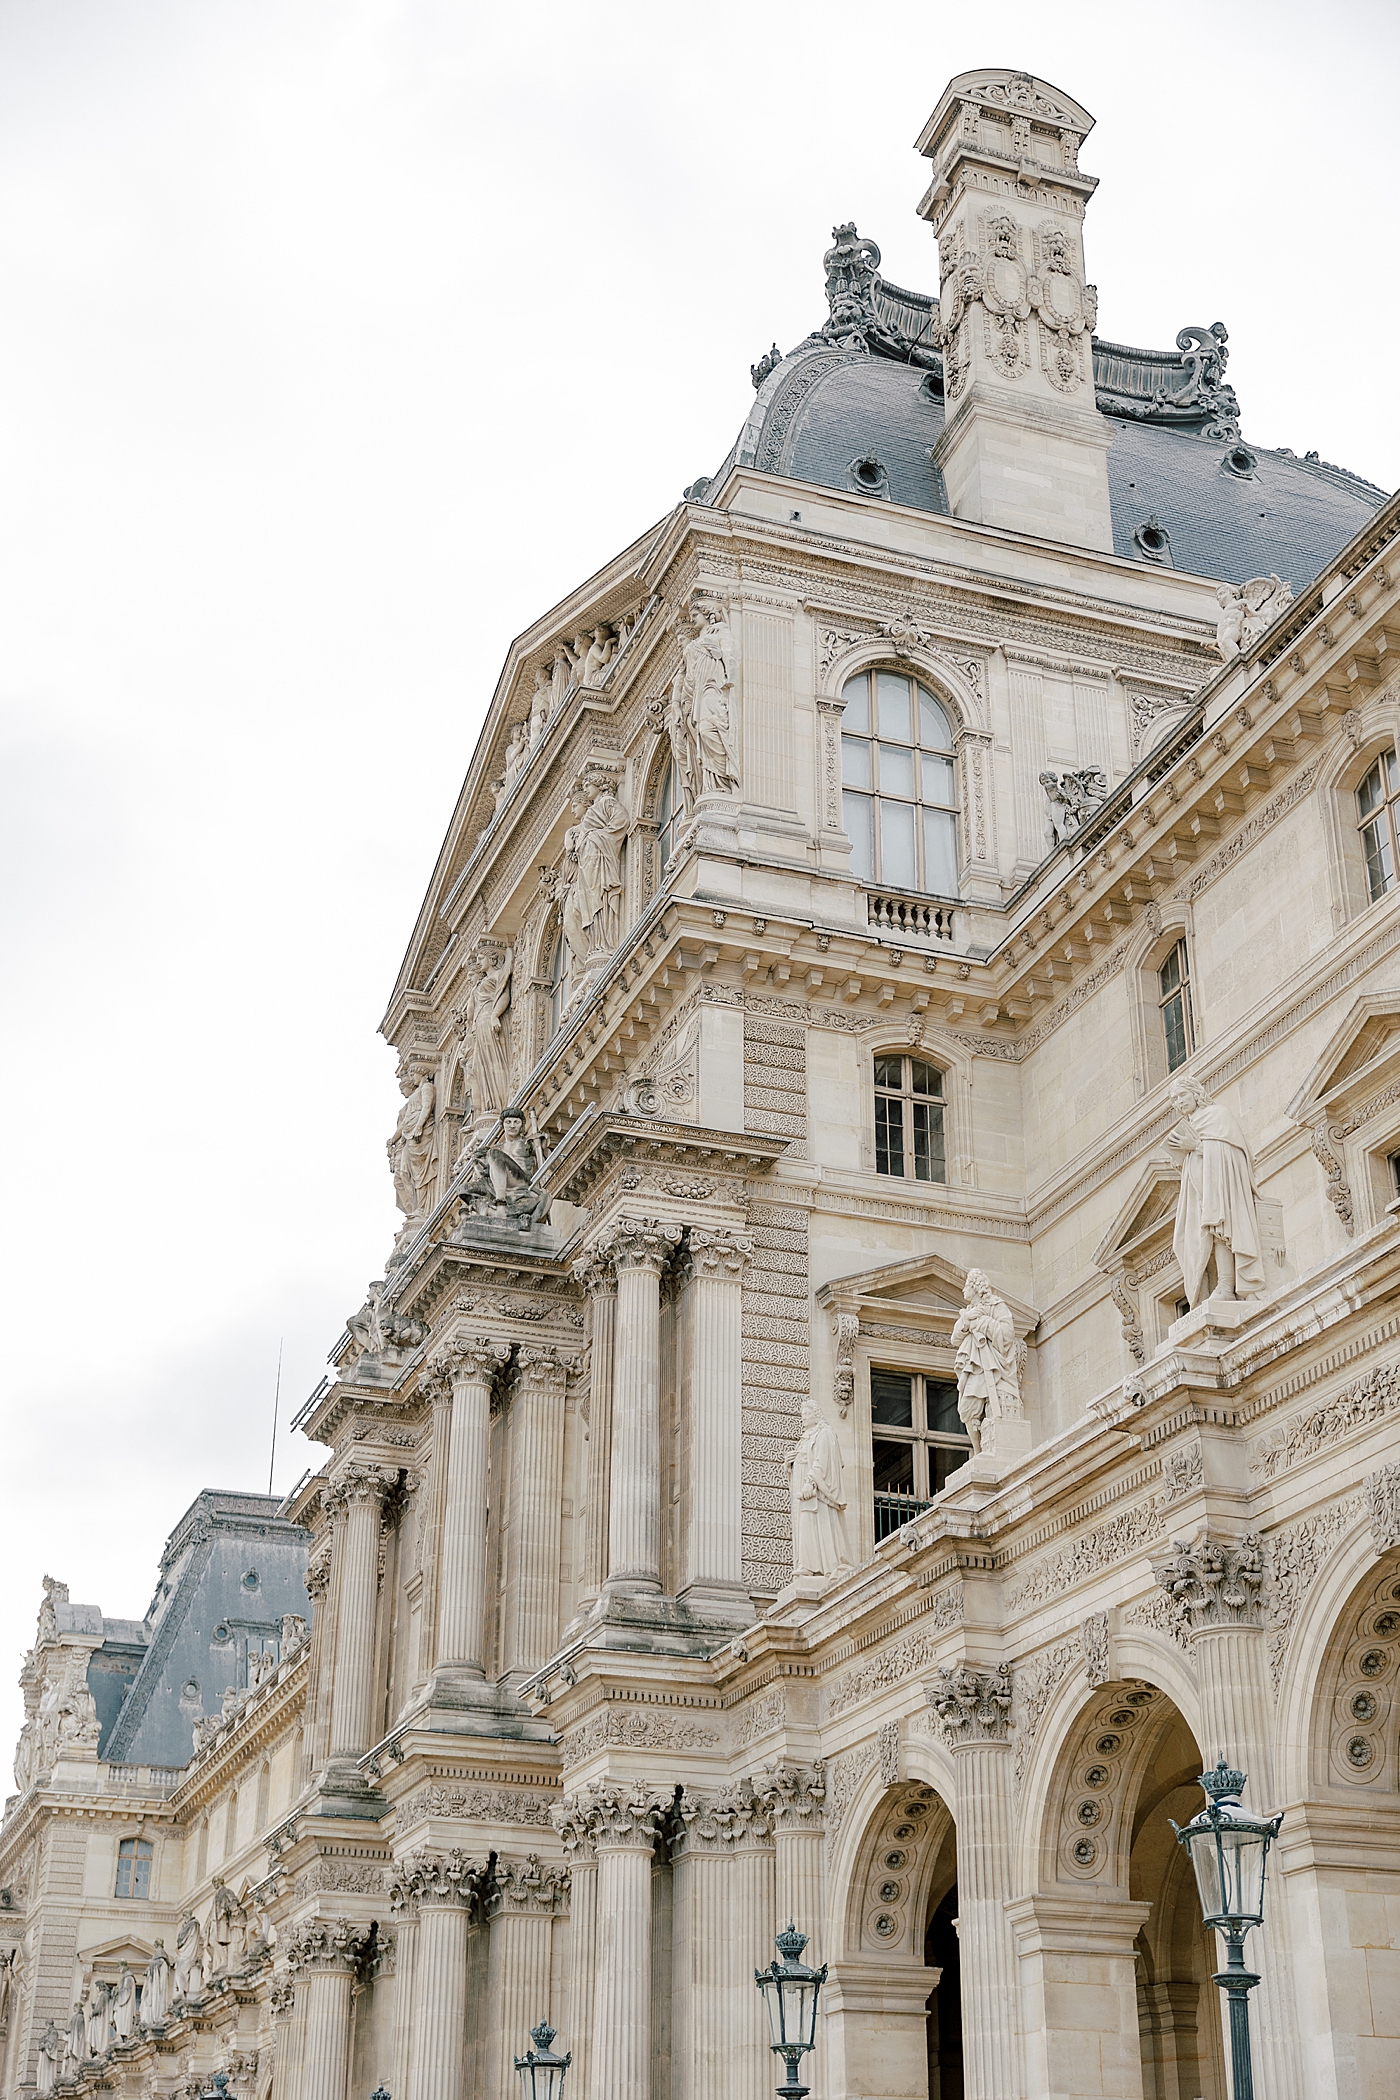 Location image of the outside of the Louvre | Image by Hope Helmuth Photography